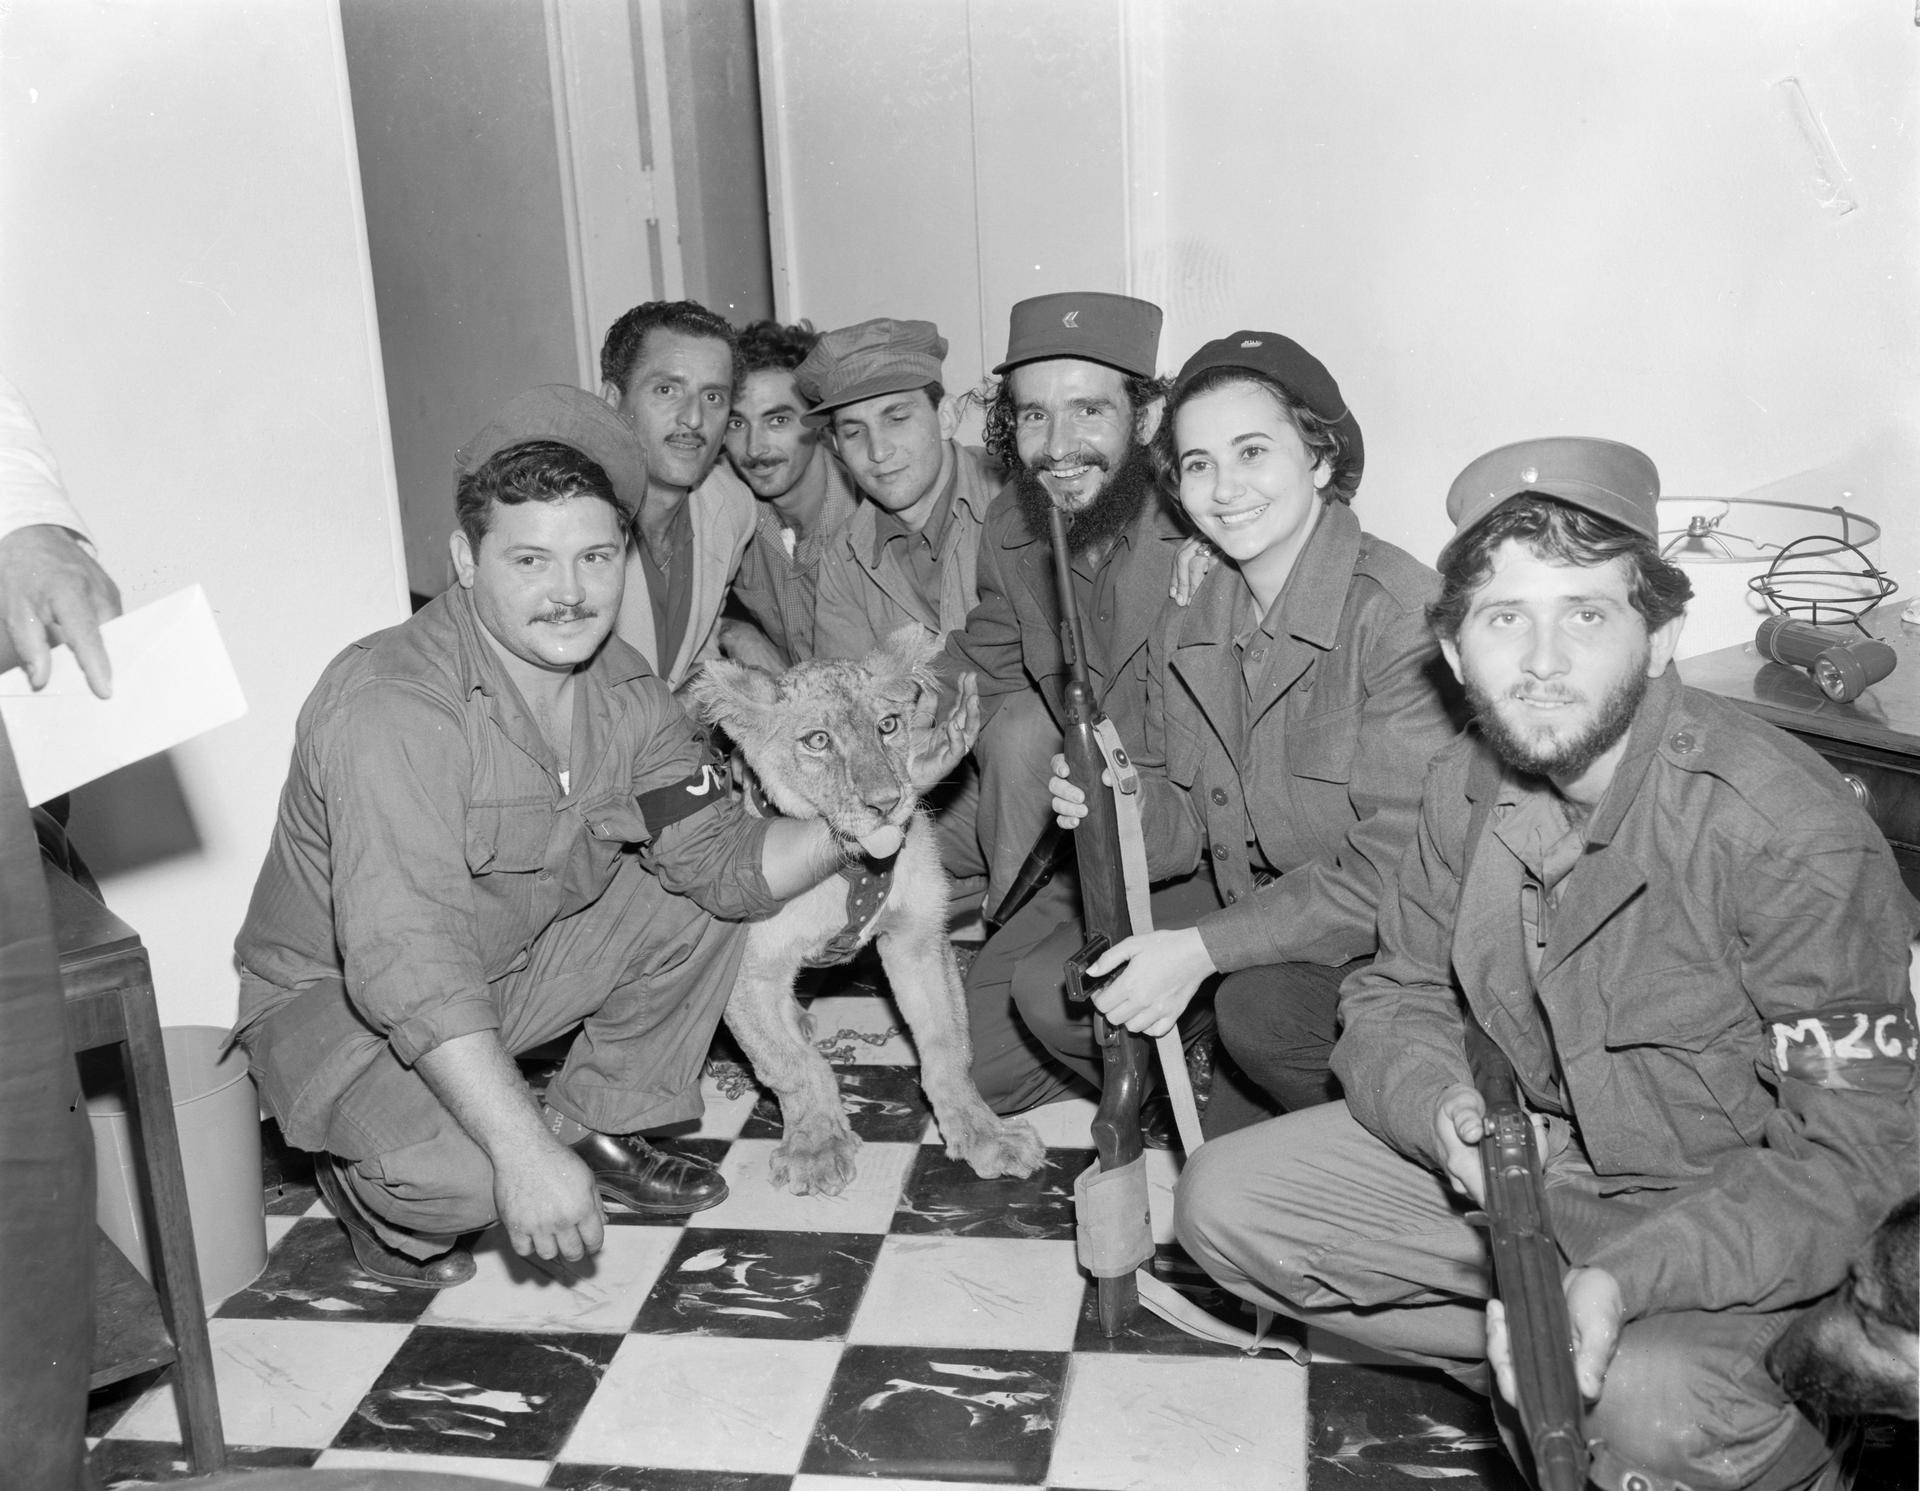 January 1959 - Havana, Cuba - Several soldiers and a guerrilla gather around a lion cub that was found in the house of a prison official.